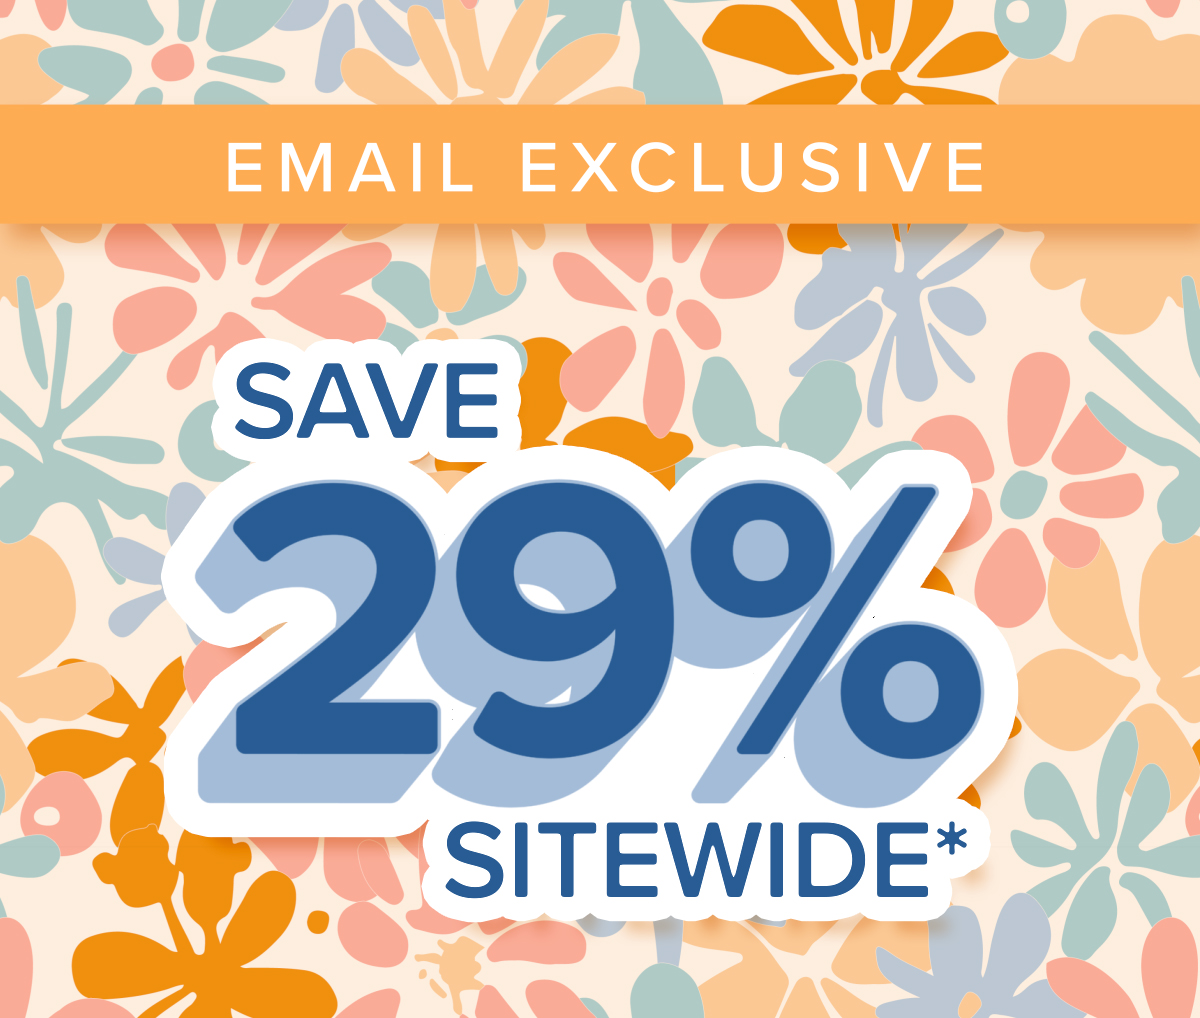 Save 29% Sitewide